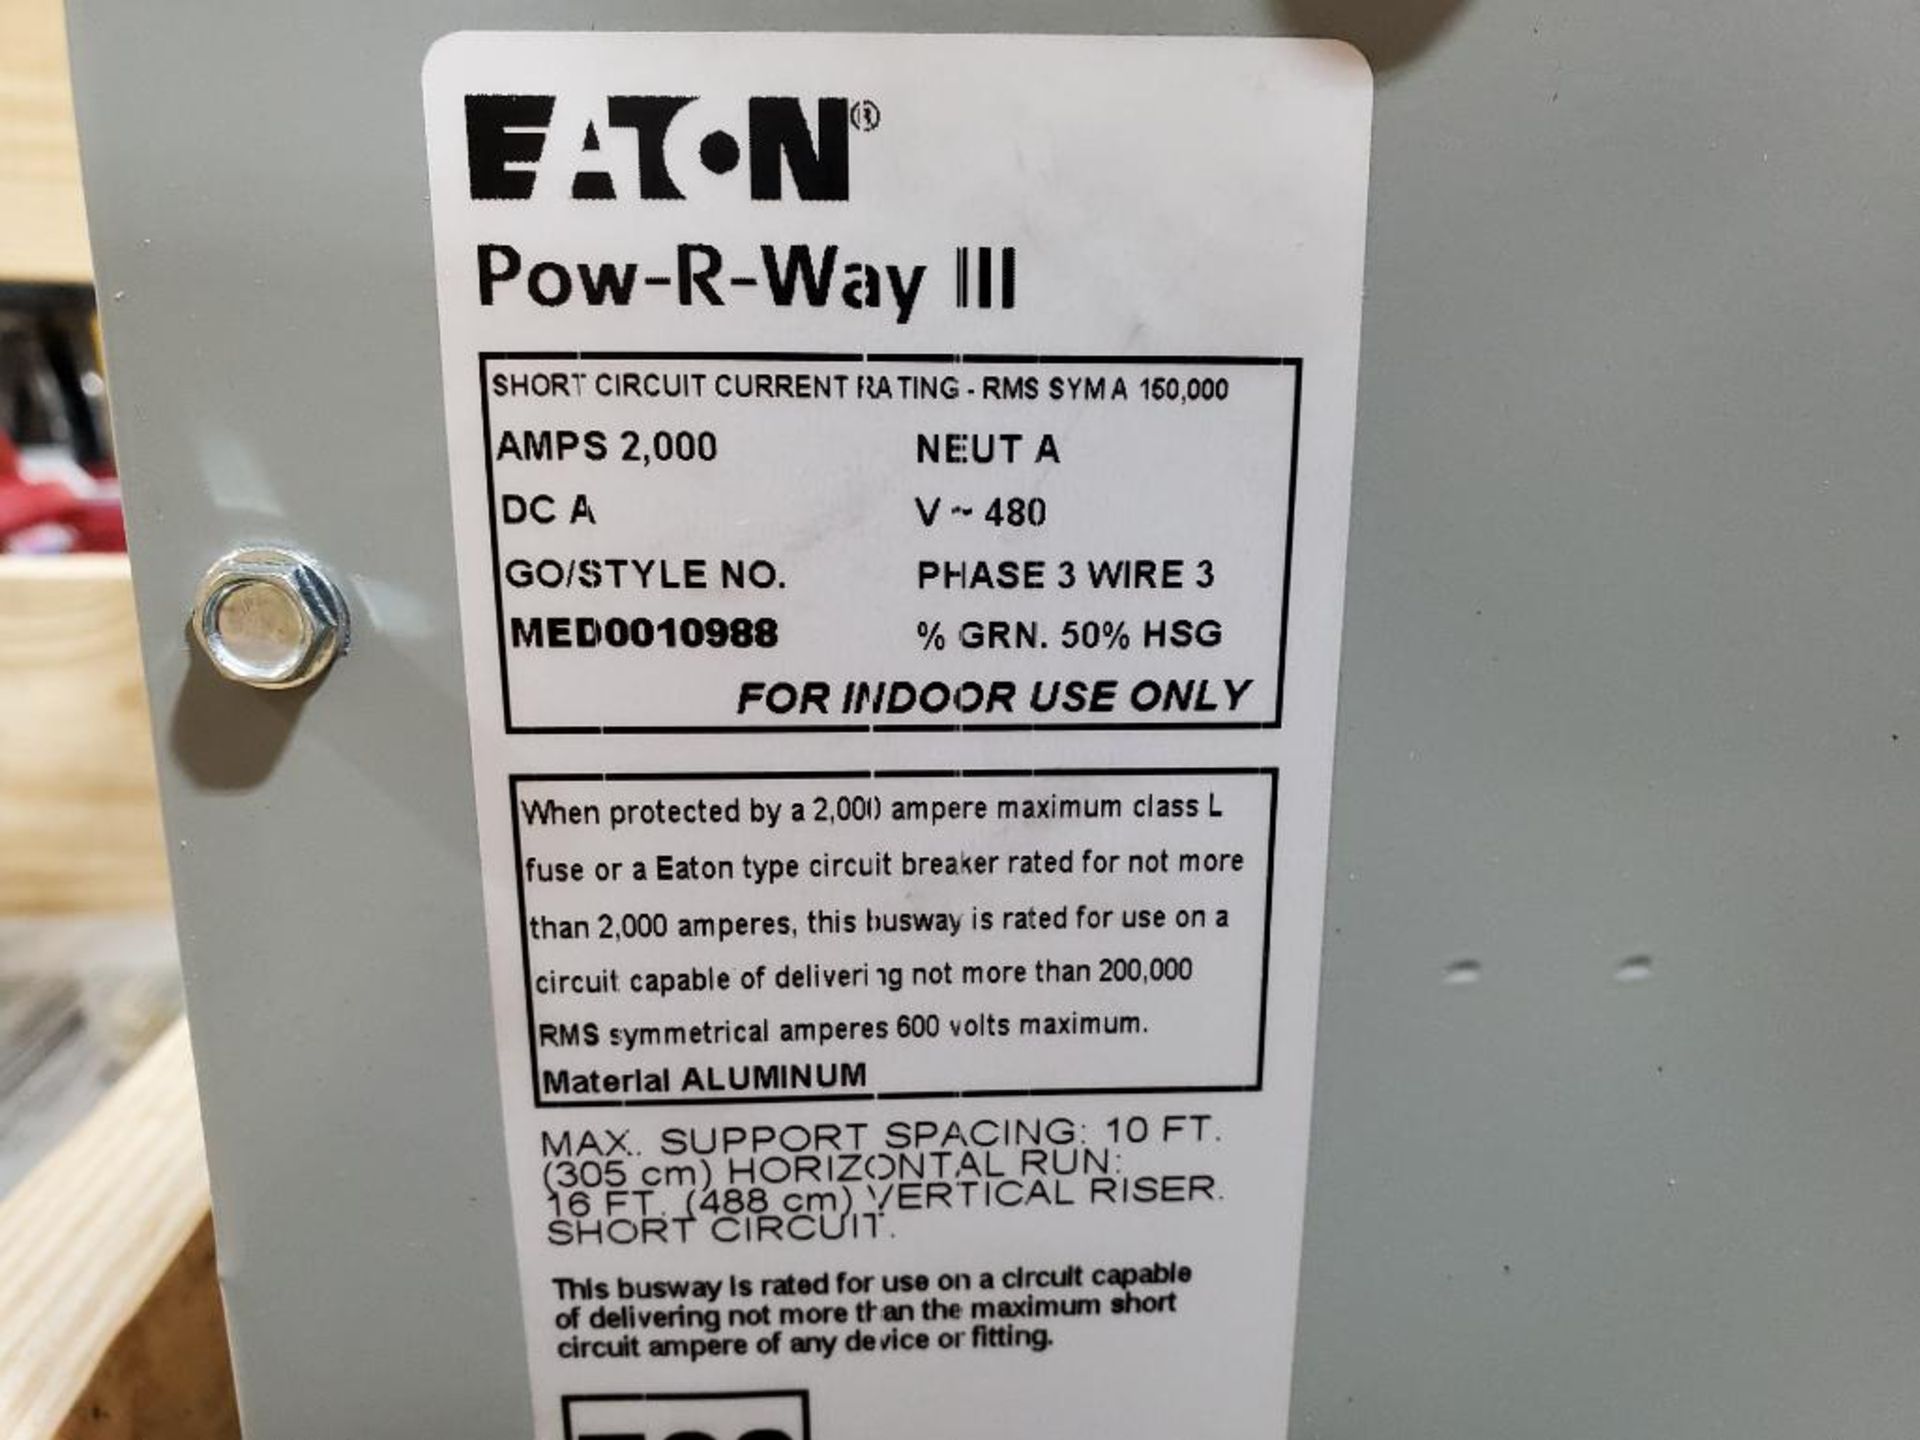 2000amp Eaton Pow-R-Way III bus tap box. 3 wire, 480v. MED0010988. New in crate. - Image 5 of 7